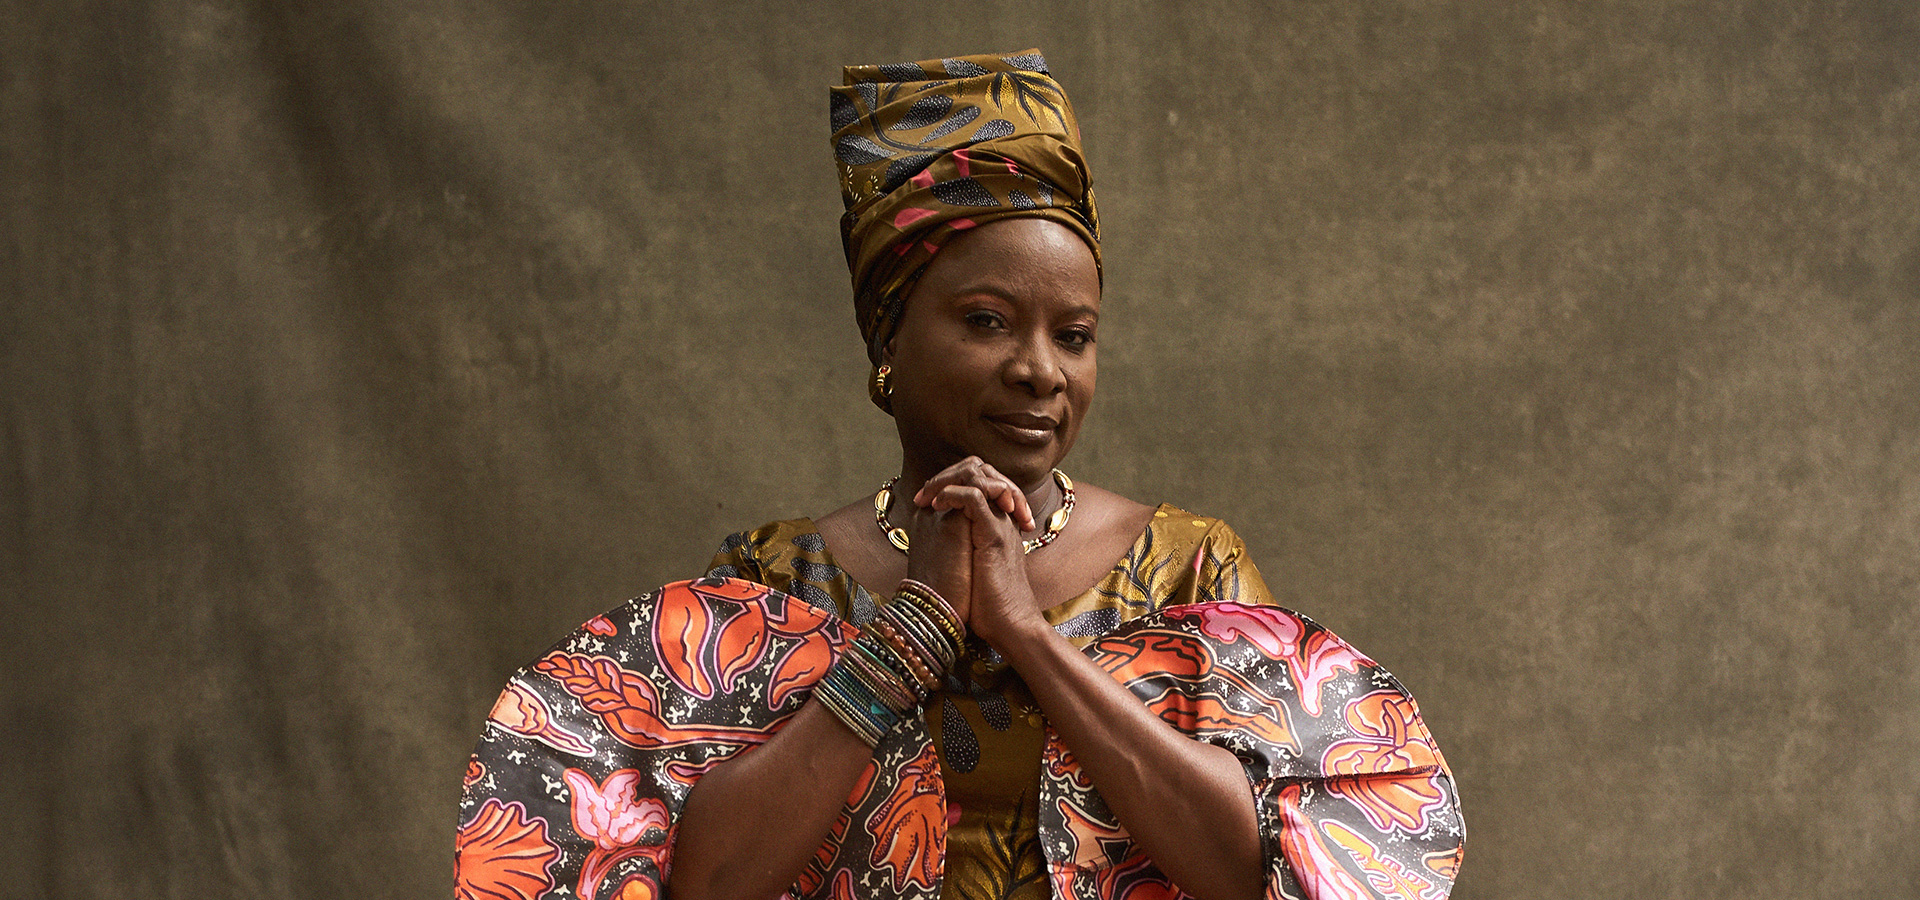 Angelique Kidjo wearing a patterned headwrap matching her dress. She sits with her hands clasped together, wrists adorned with a stack of bangle bracelets, and looks at the camera.